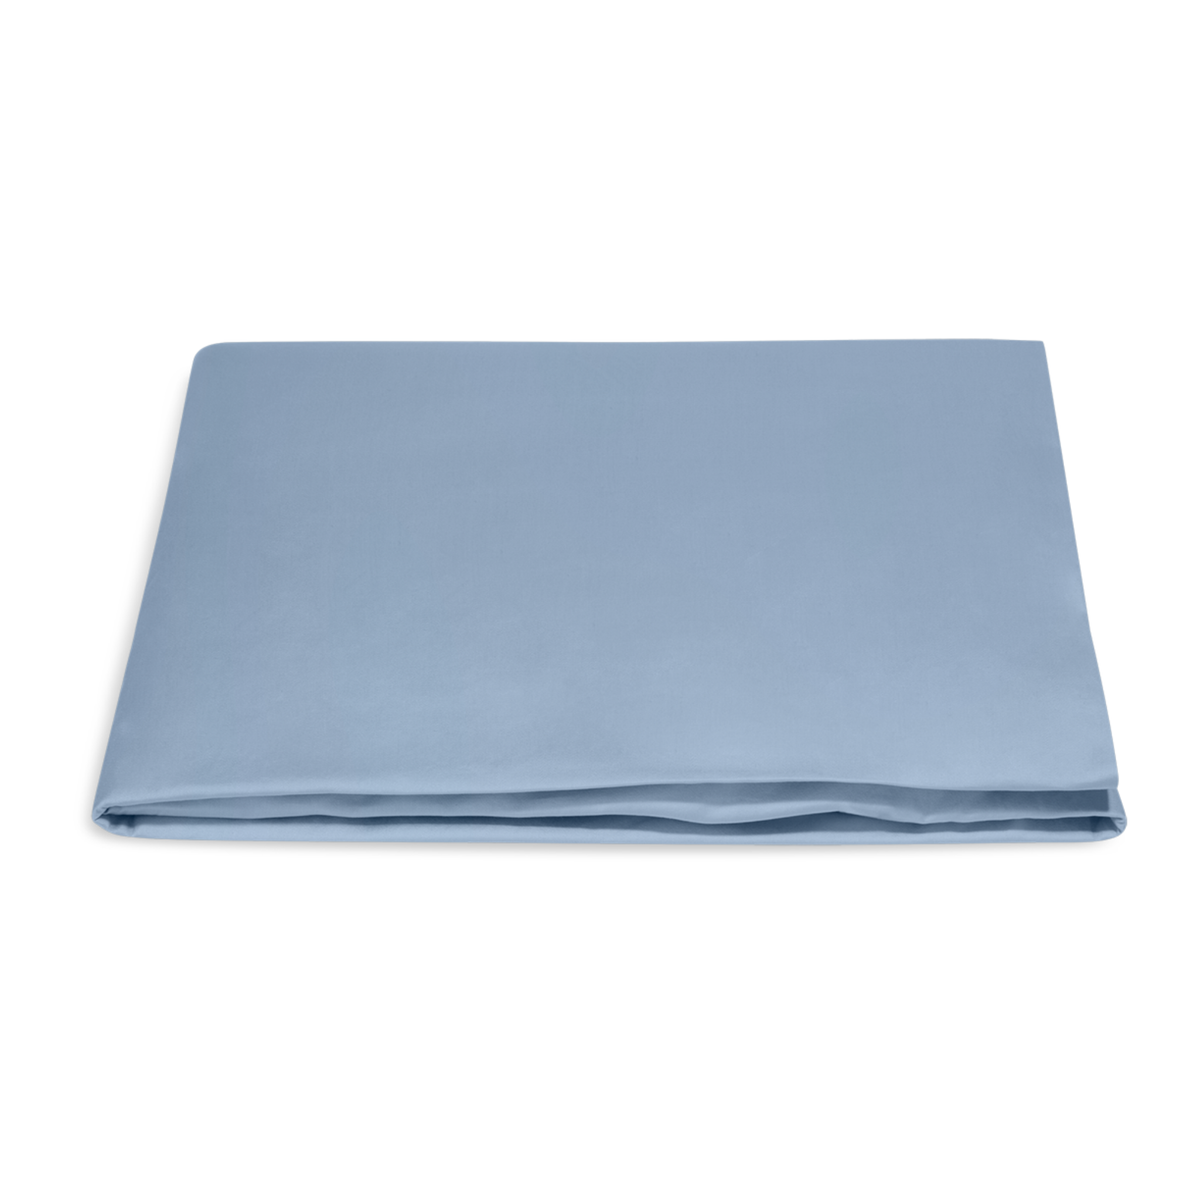 Folded Fitted Sheet of Matouk Nocturne Collection Hazy Blue Color